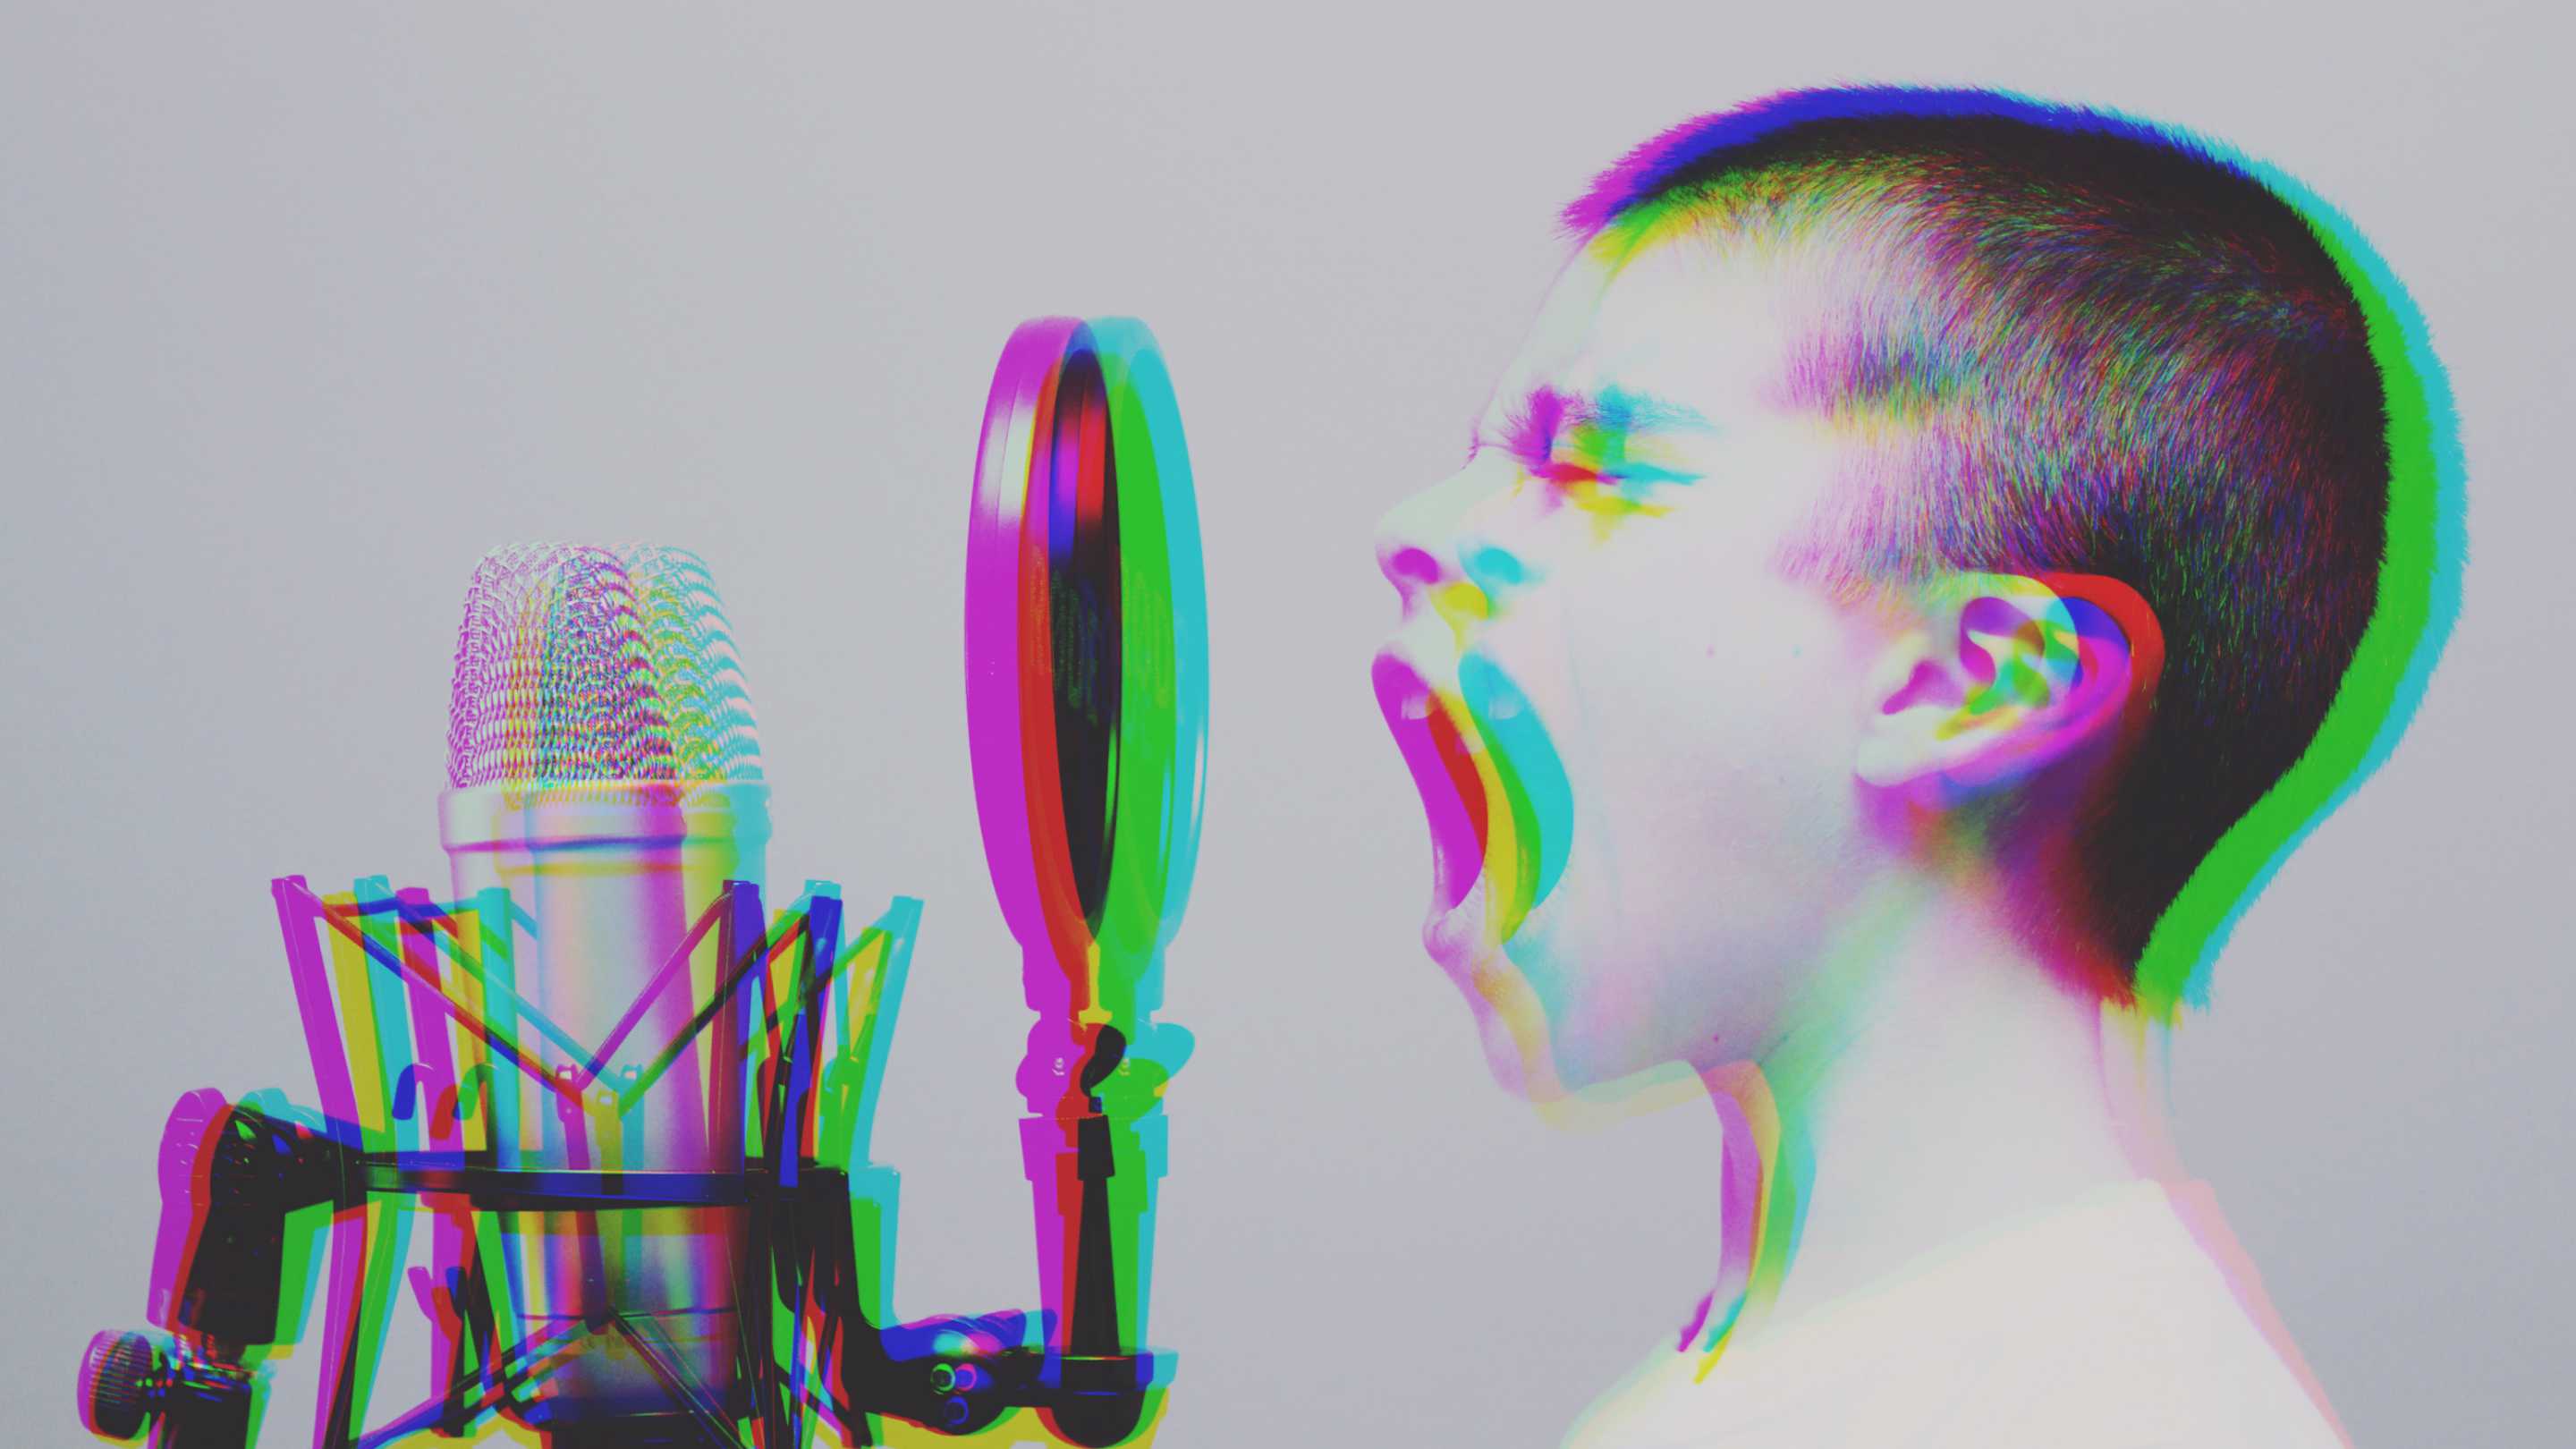 Glitched picture of shaven headed boy shouting into microphone with pop screen